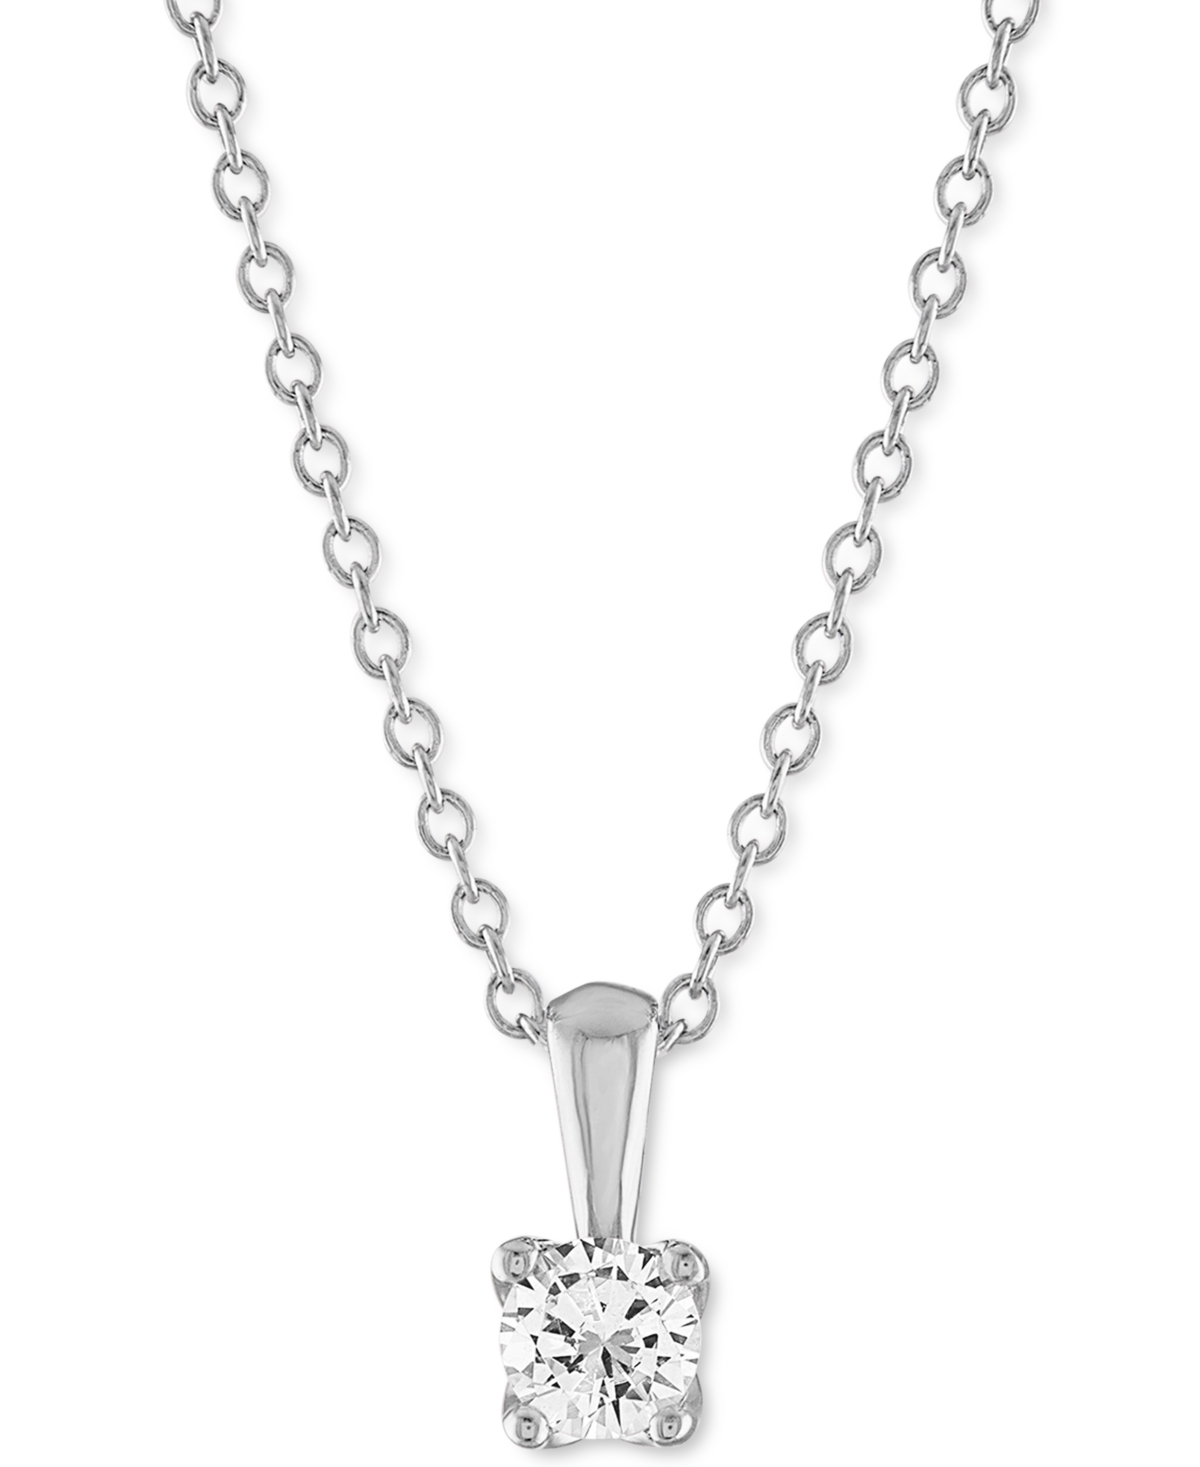 Certified Diamond 18" Pendant Necklace (1/3 ct. t.w.) in 14k White Gold featuring diamonds with the De Beers Code of Origin, Created for Macy'